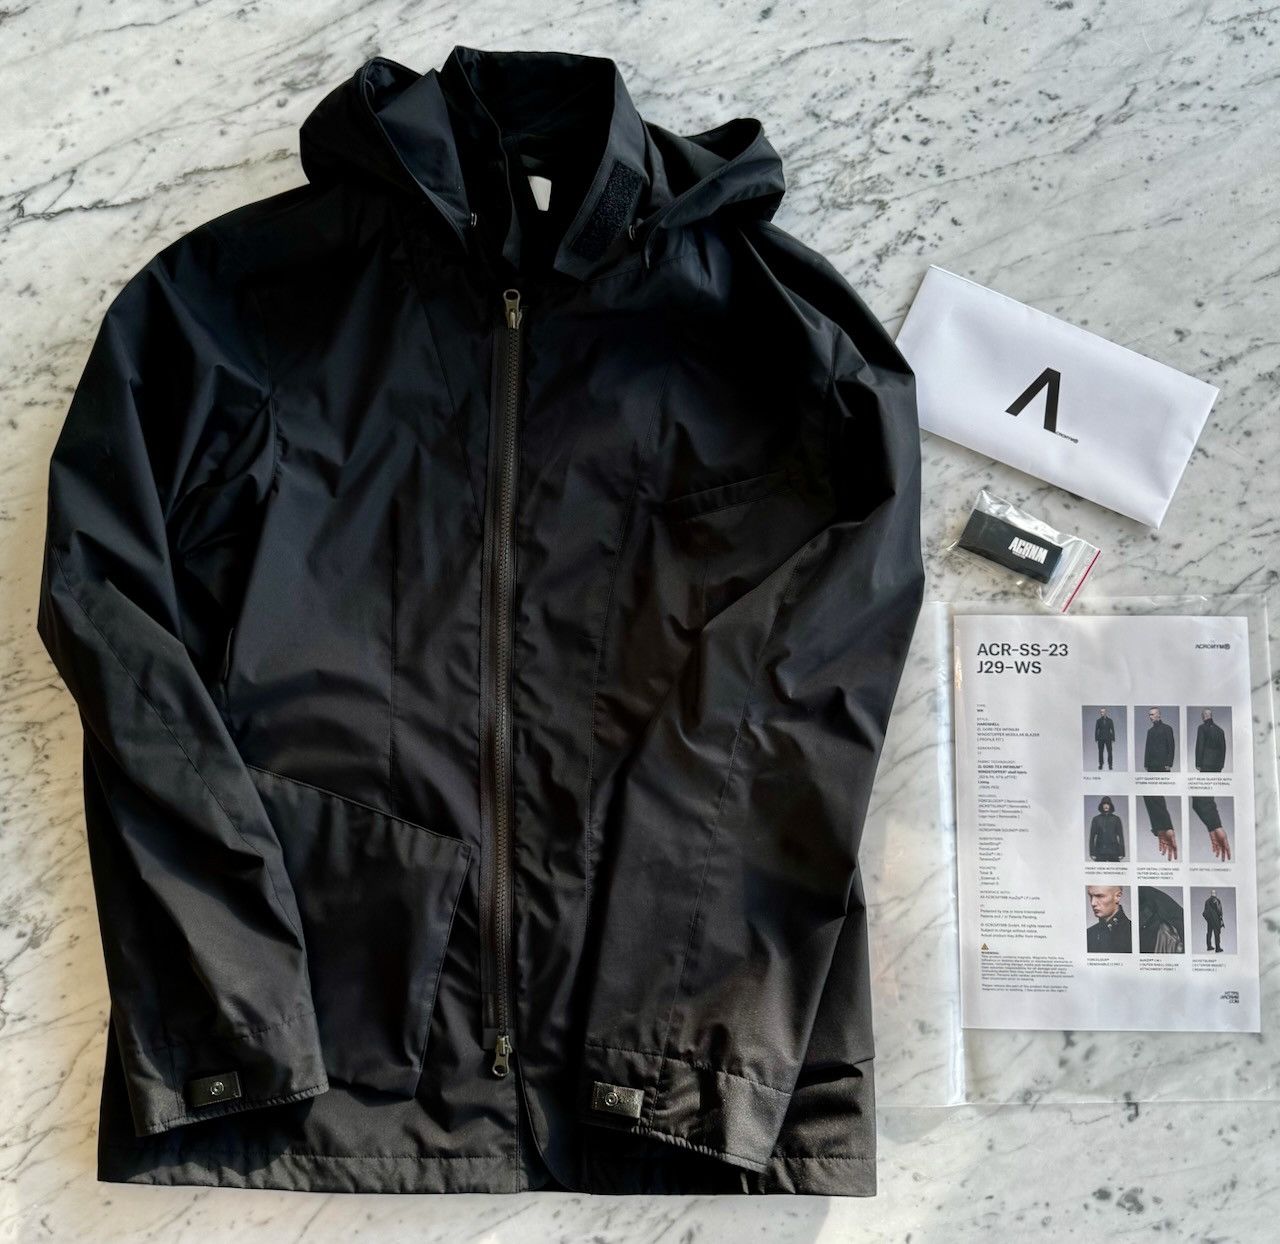 Acronym SOLD OUT Acronym J29-WS SS-23 | Grailed